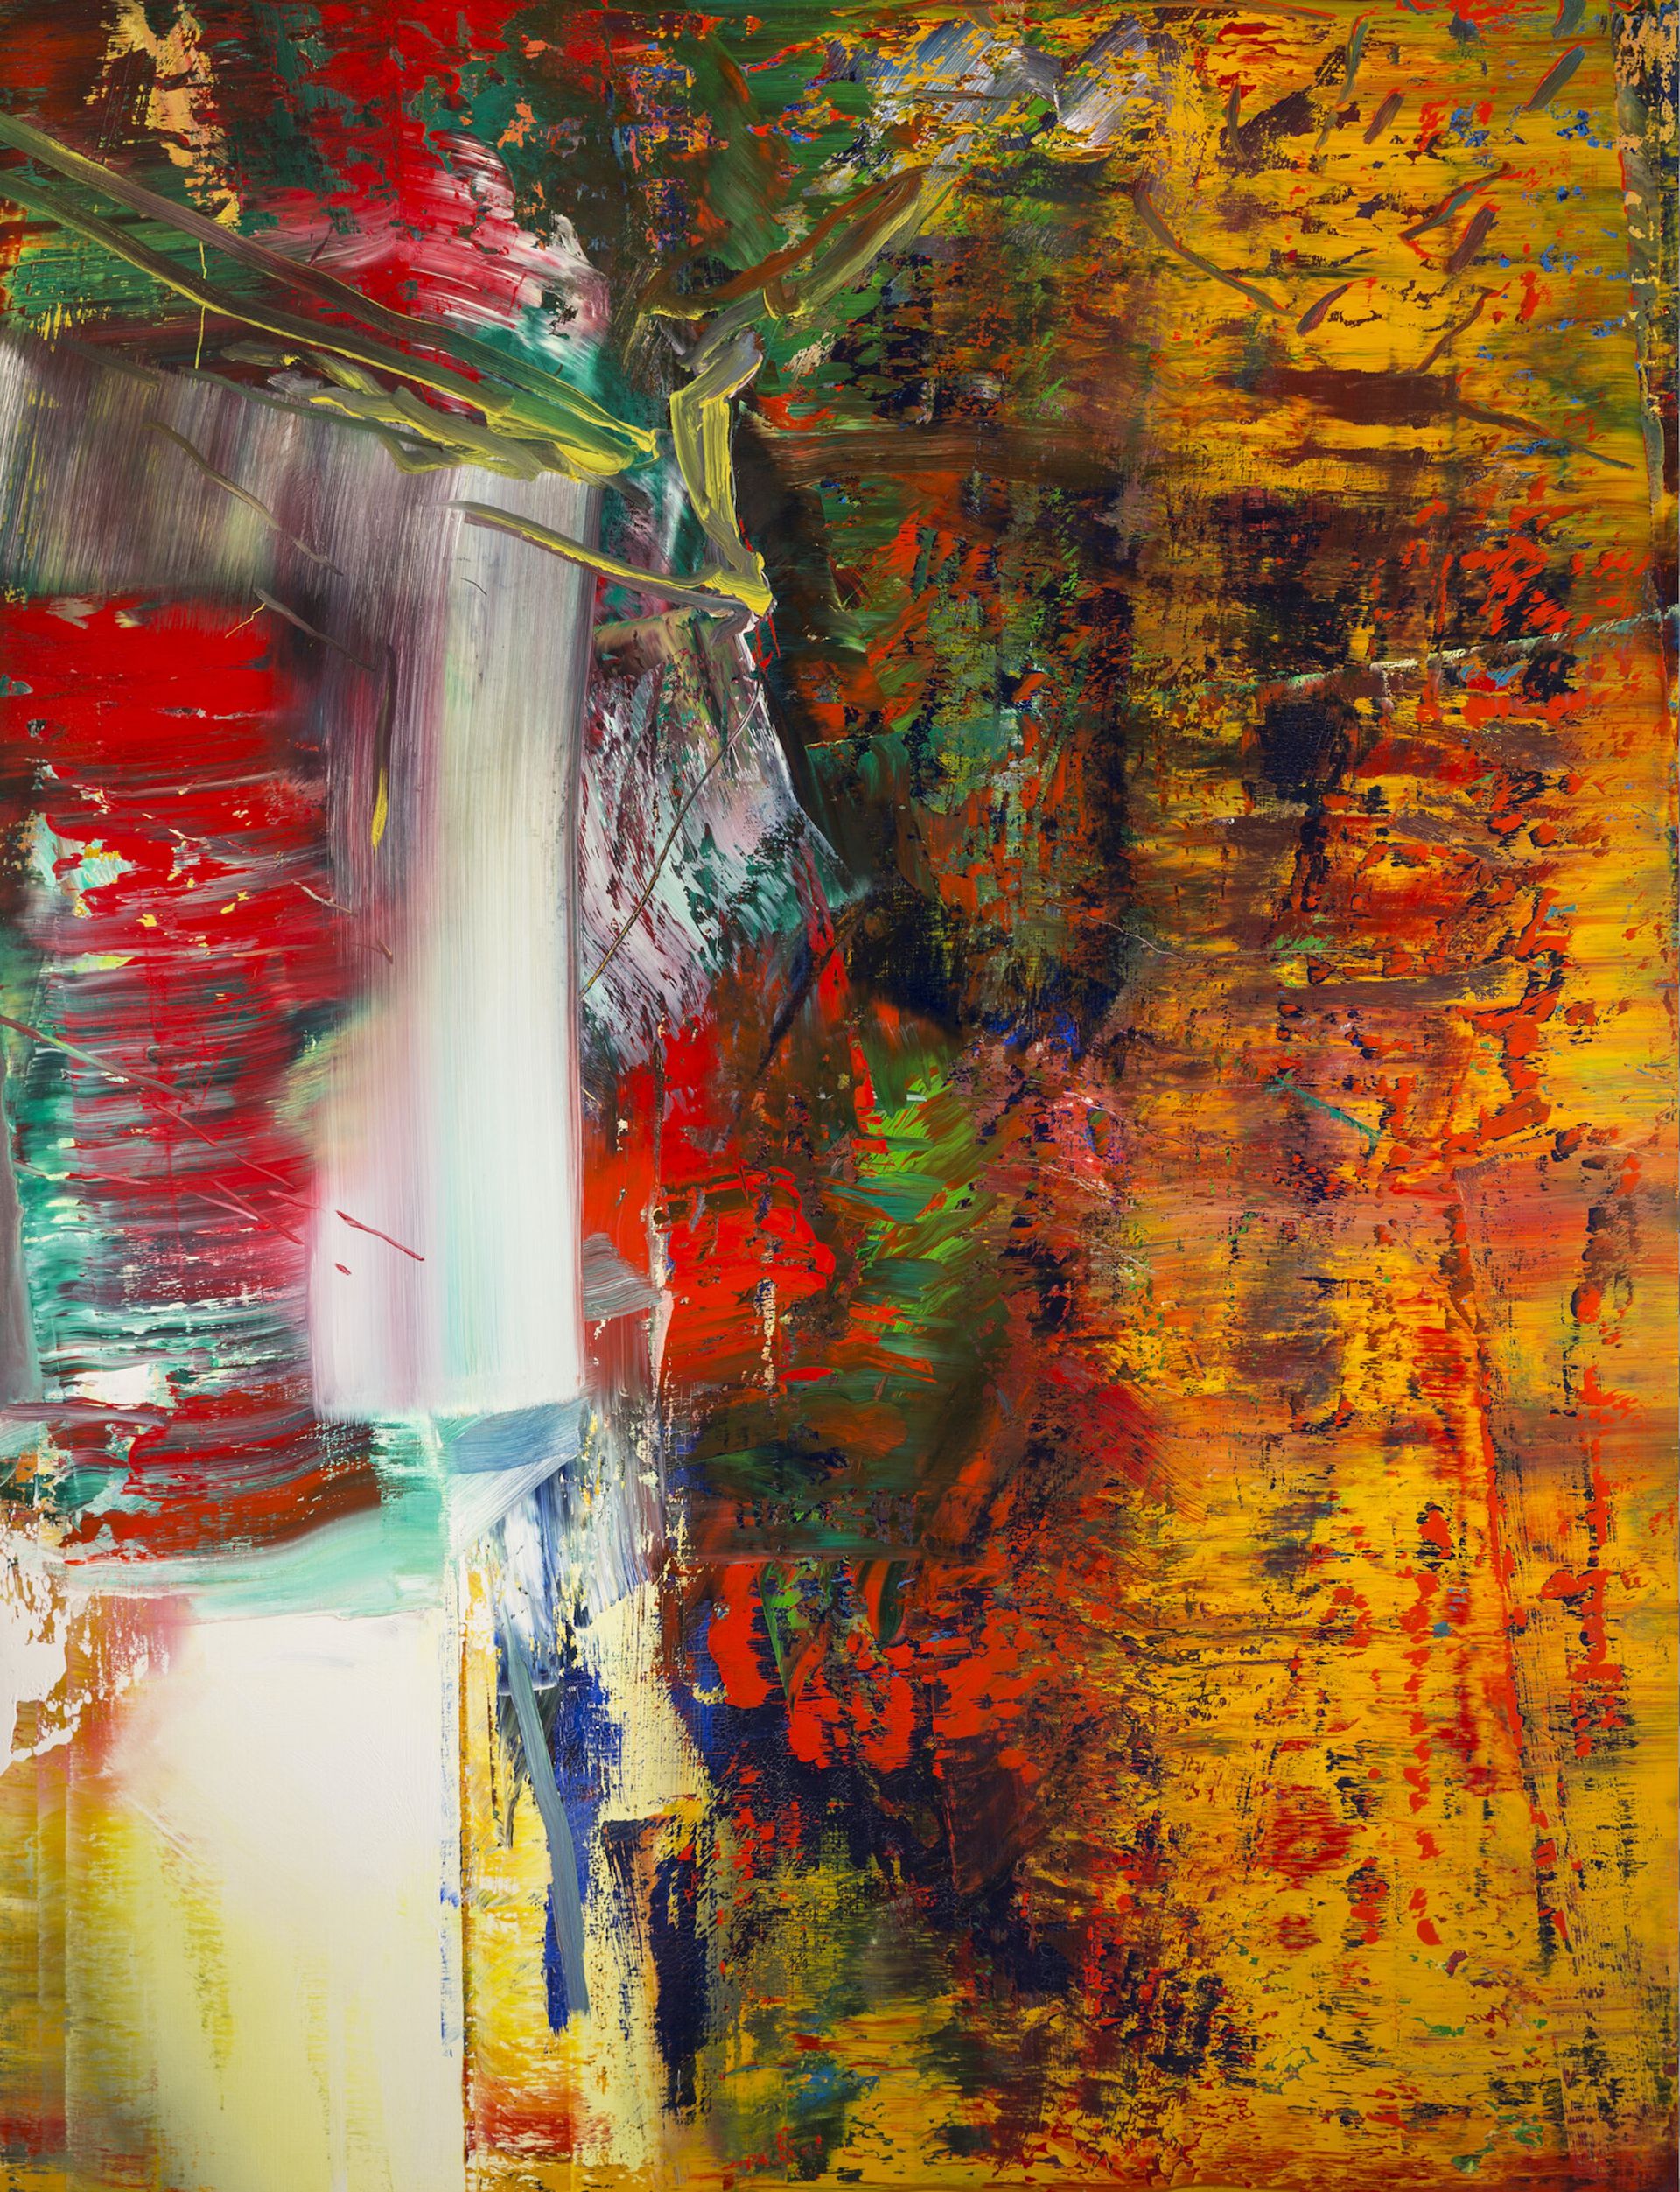 Gerhard Richter, Abstract Painting (613-3), 1986. Promised gift of Preston H. Haskell, Class of 1960. © Gerhard Richter / Photo: Douglas J. Eng